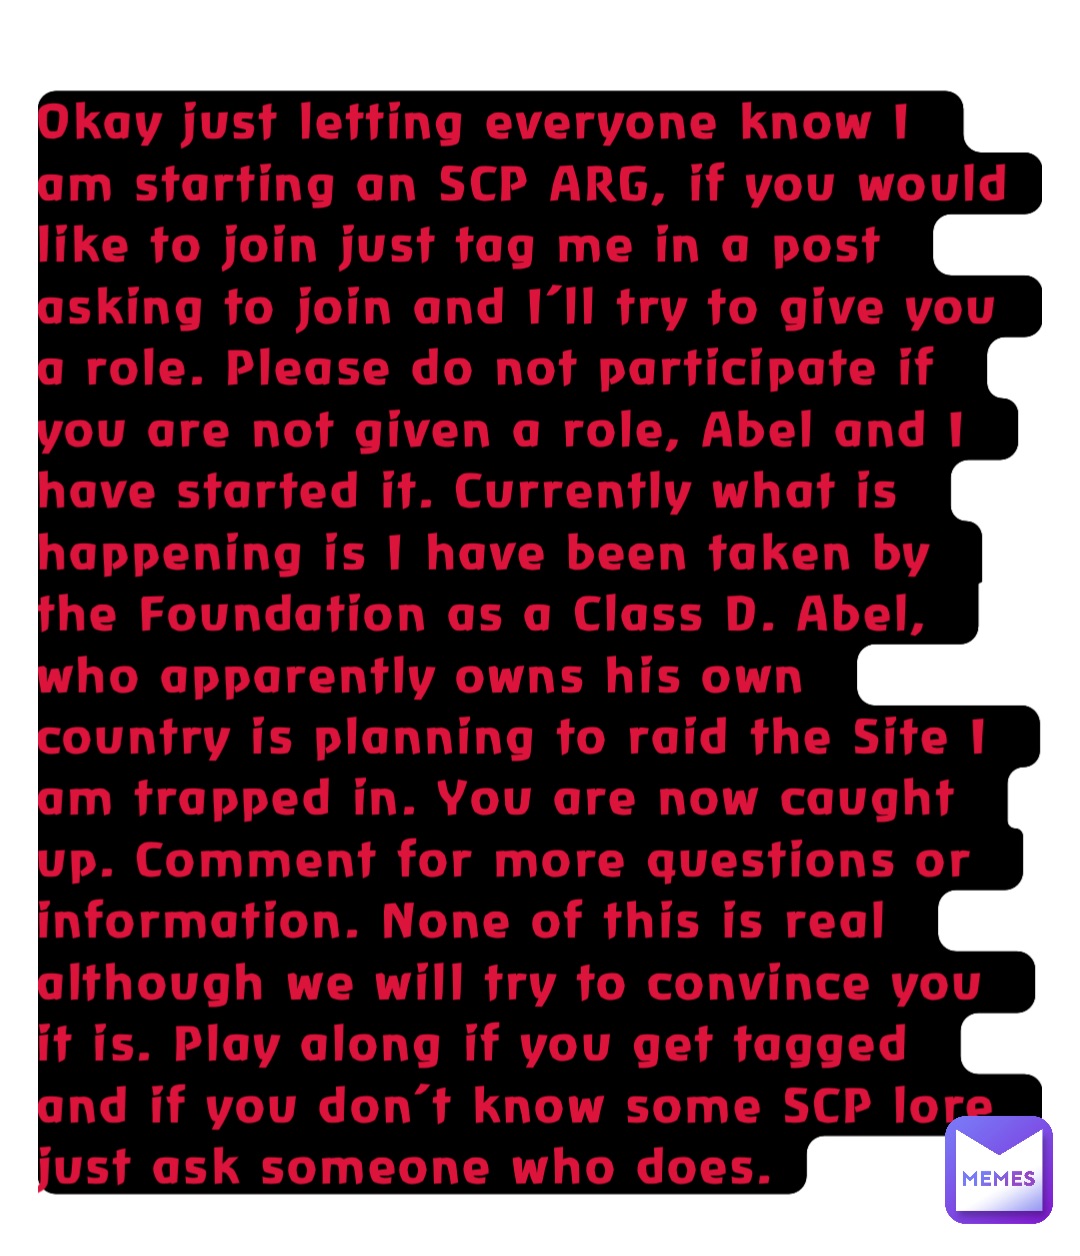 Okay just letting everyone know I am starting an SCP ARG, if you would like to join just tag me in a post asking to join and I’ll try to give you a role. Please do not participate if you are not given a role, Abel and I have started it. Currently what is happening is I have been taken by the Foundation as a Class D. Abel, who apparently owns his own country is planning to raid the Site I am trapped in. You are now caught up. Comment for more questions or information. None of this is real although we will try to convince you it is. Play along if you get tagged and if you don’t know some SCP lore just ask someone who does.